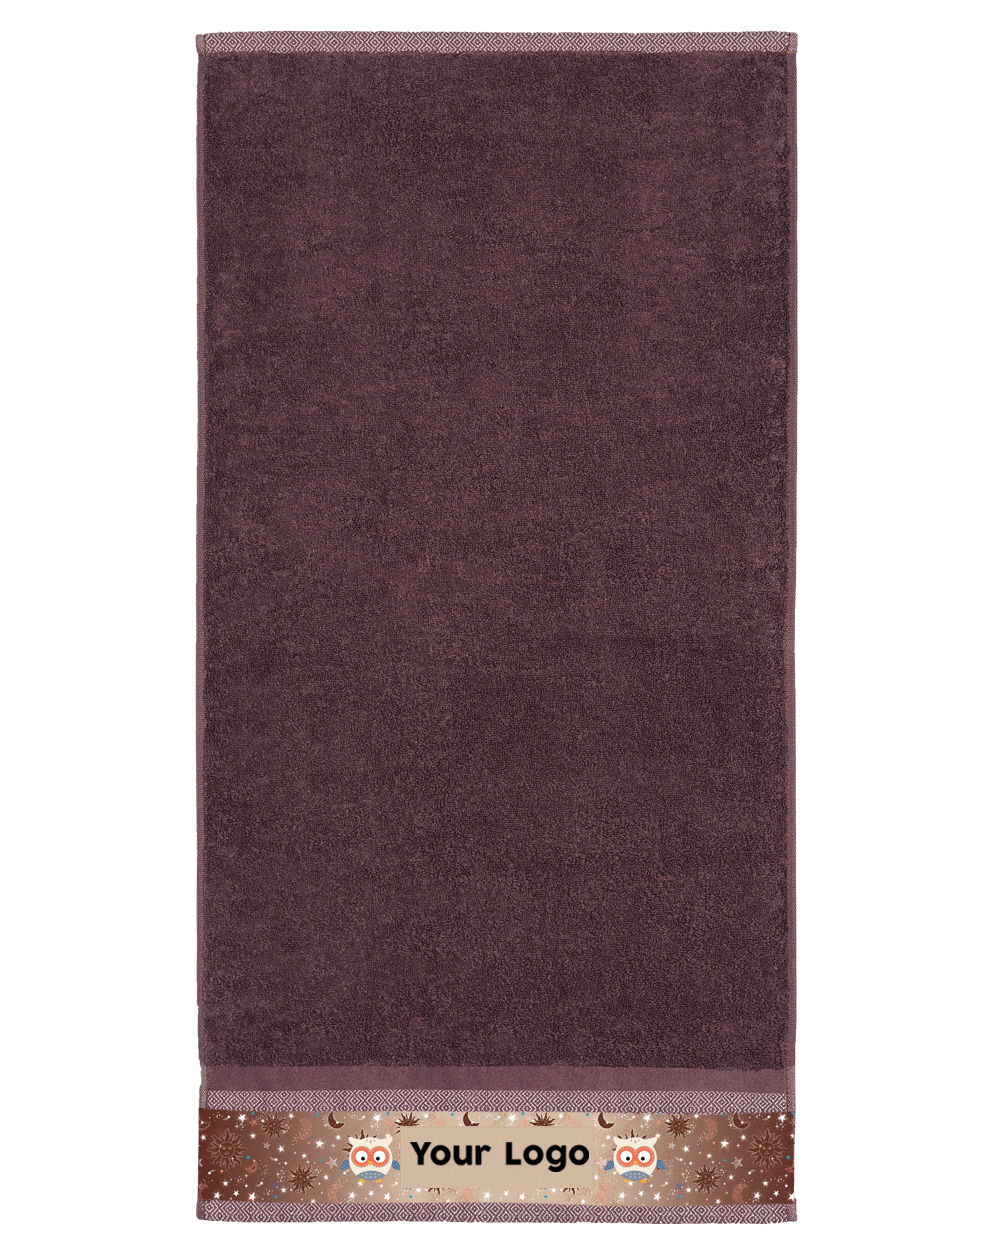 Brown Hand Towel (SIZE 16"X 32")